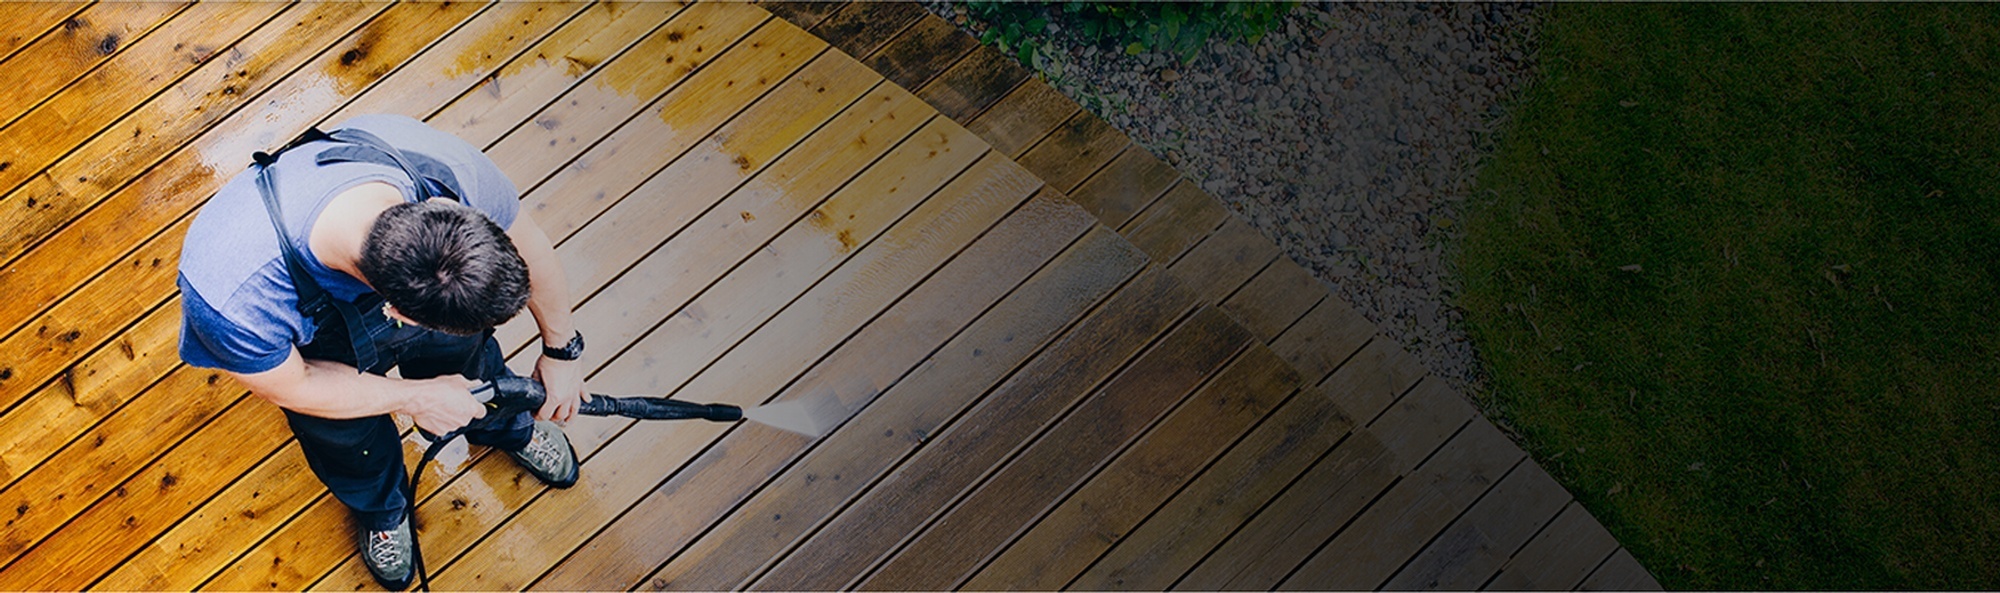 Deck Pressure Washing by Vancouver Pressure Washing Company - Groundwork Construction Cleaning  